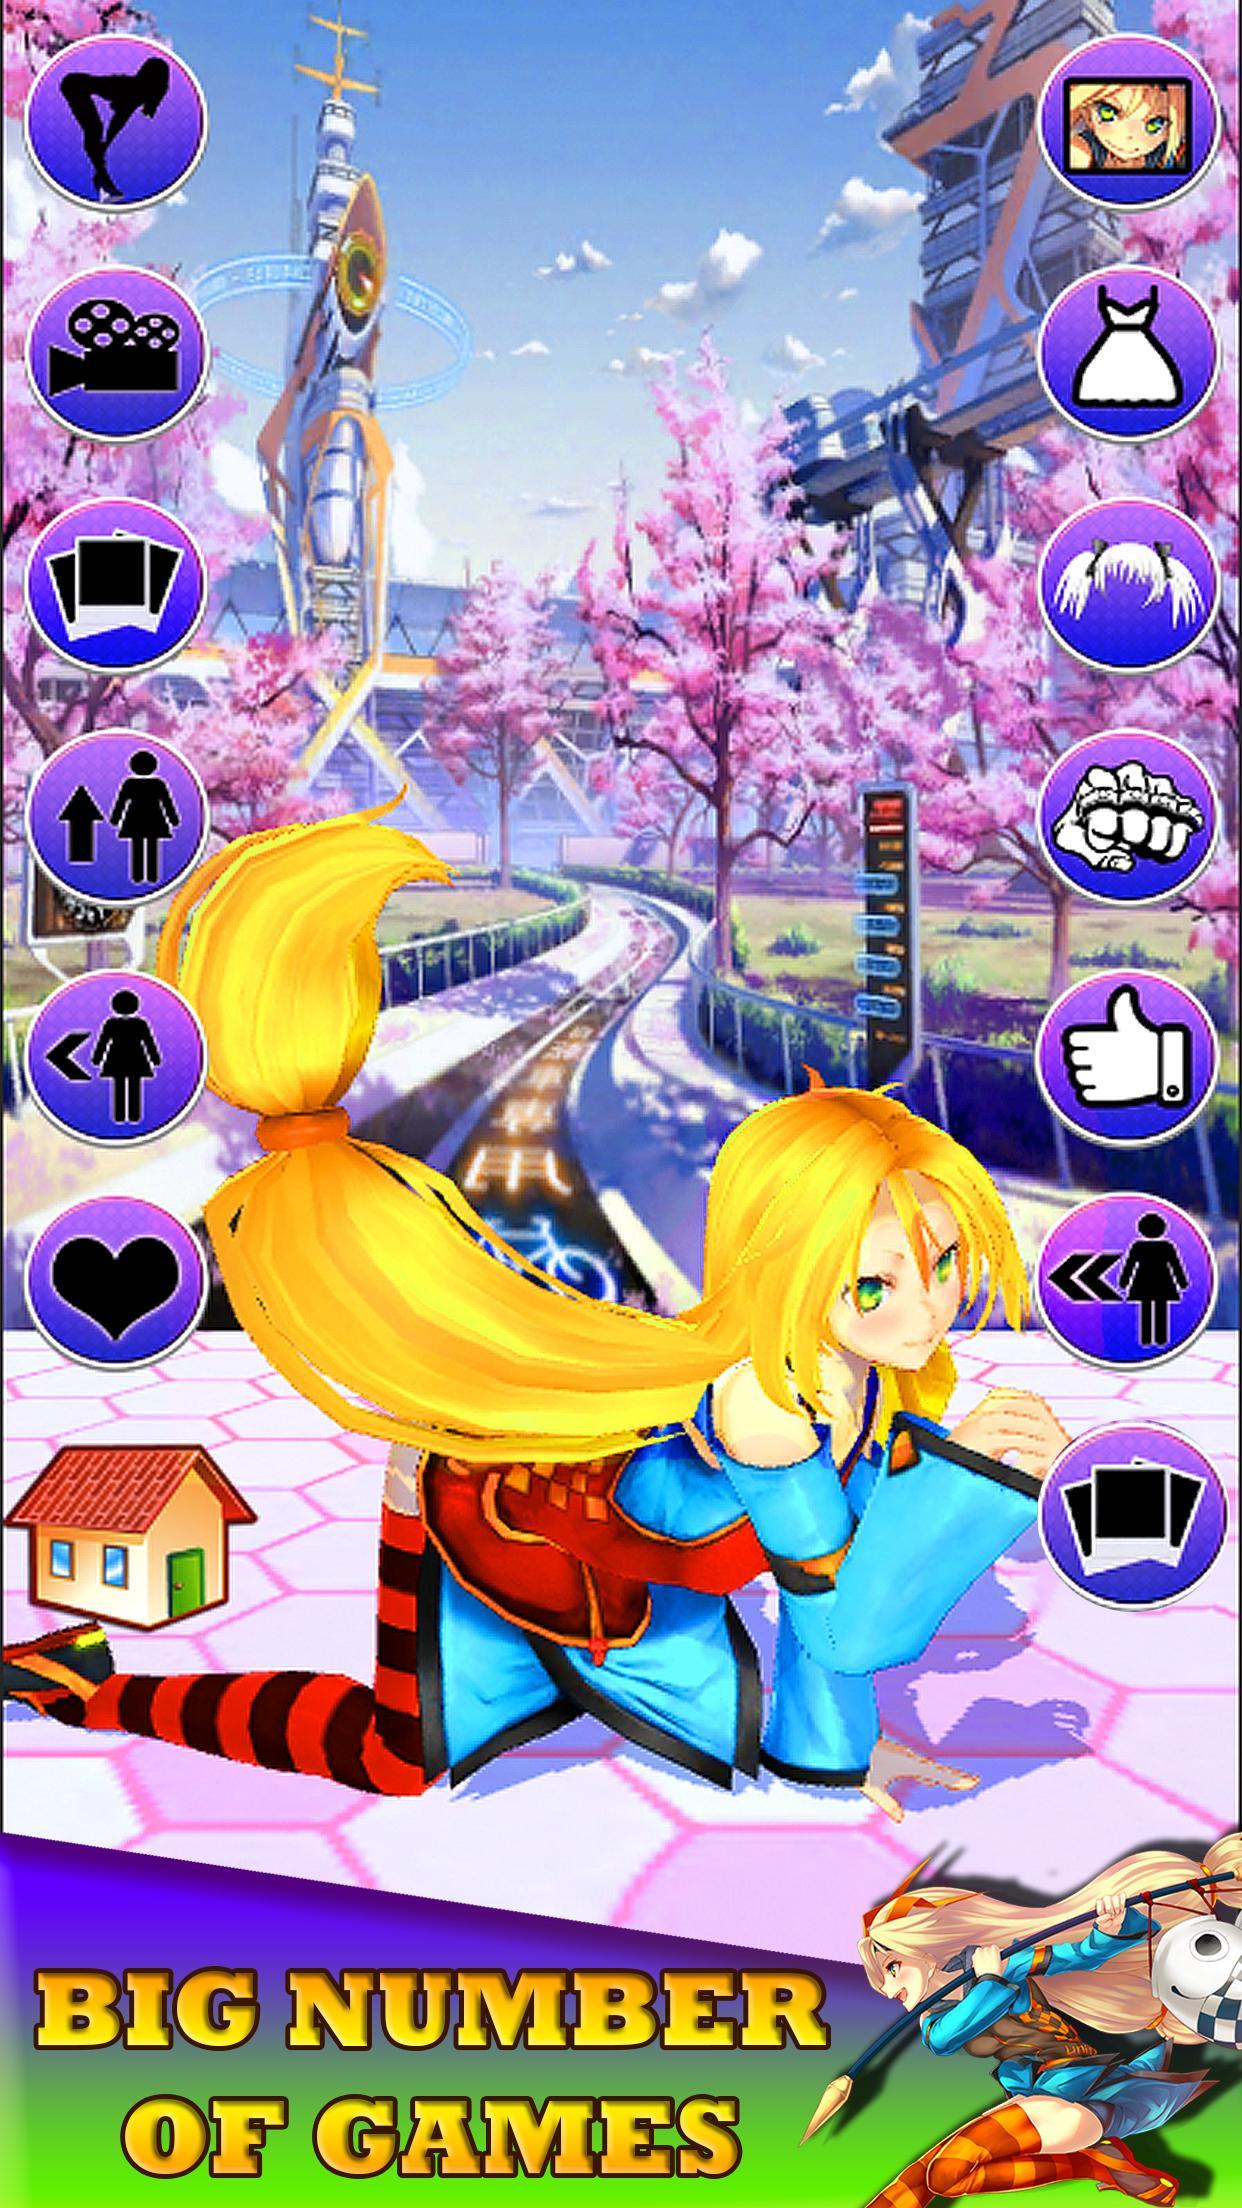 Virtual girlfriend 3D * anime for Android - APK Download